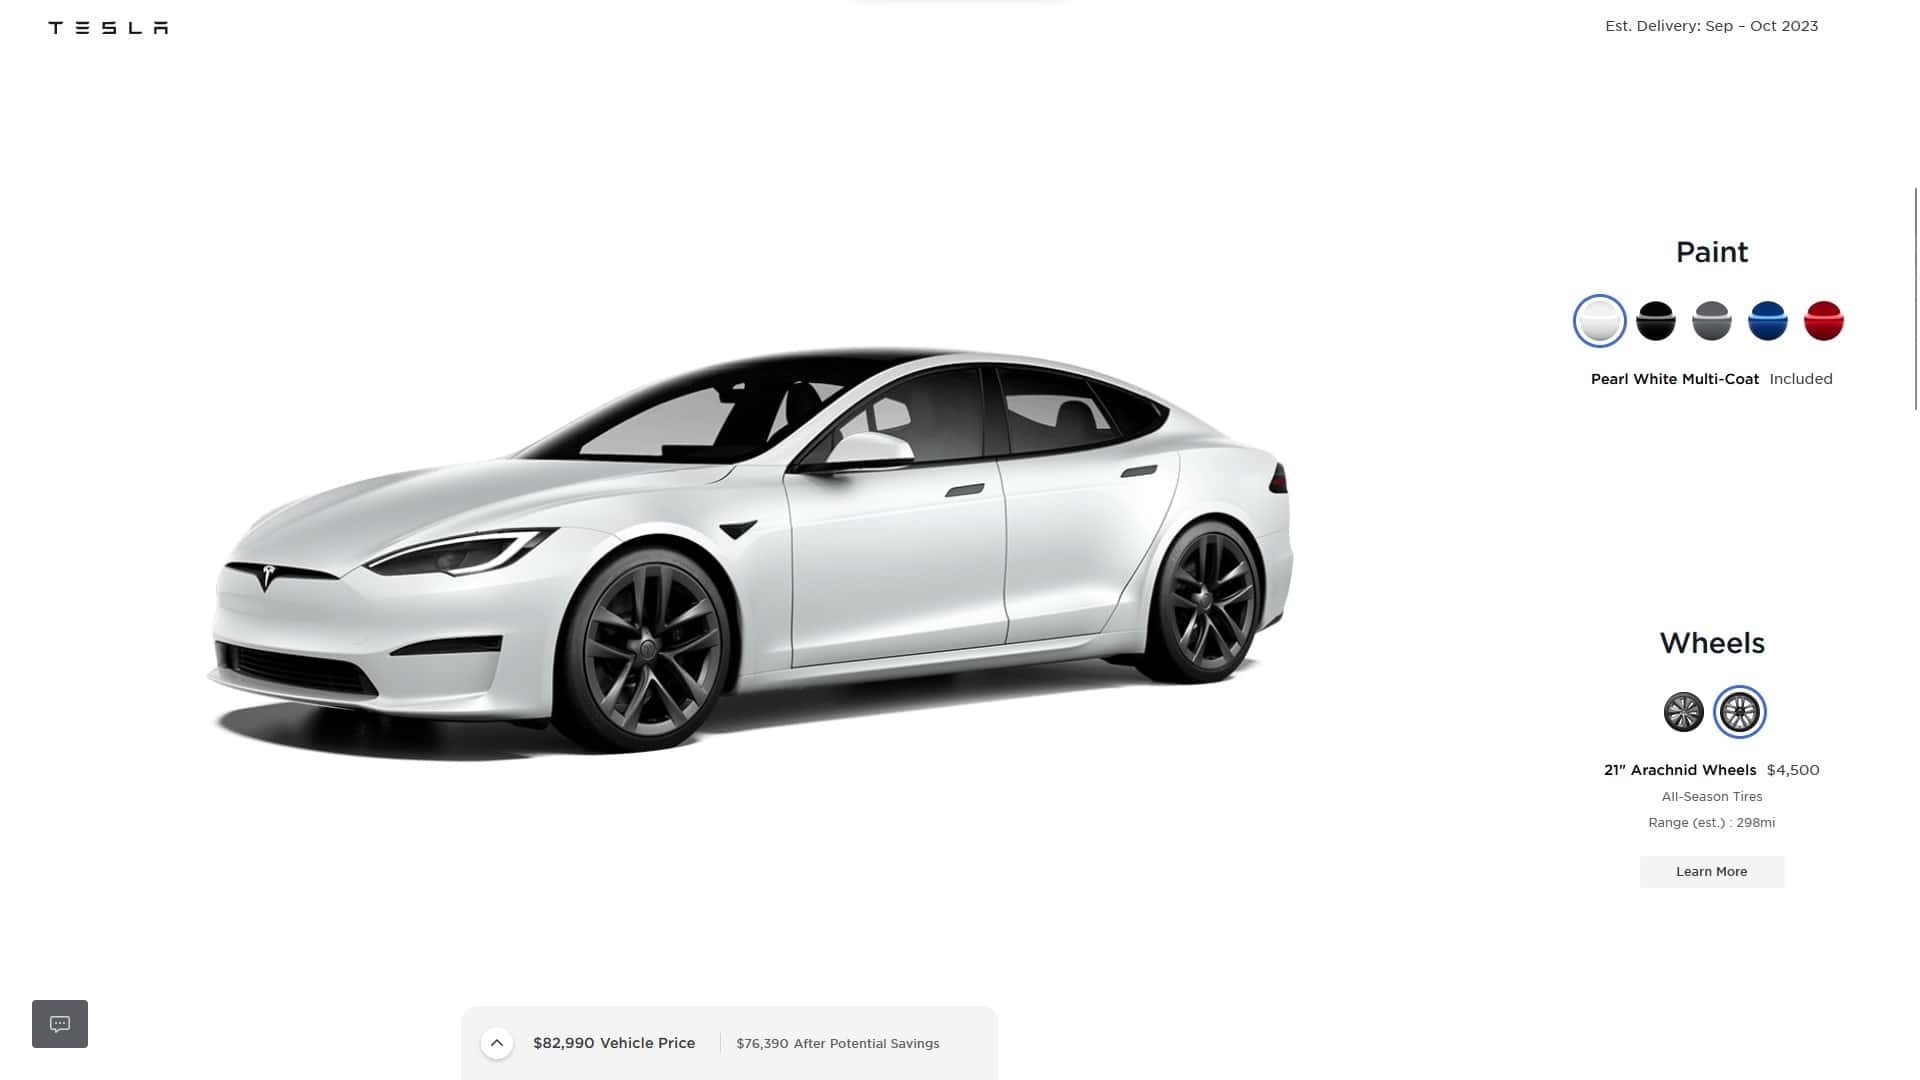 tesla introduces cheaper standard range variant for model s and model x